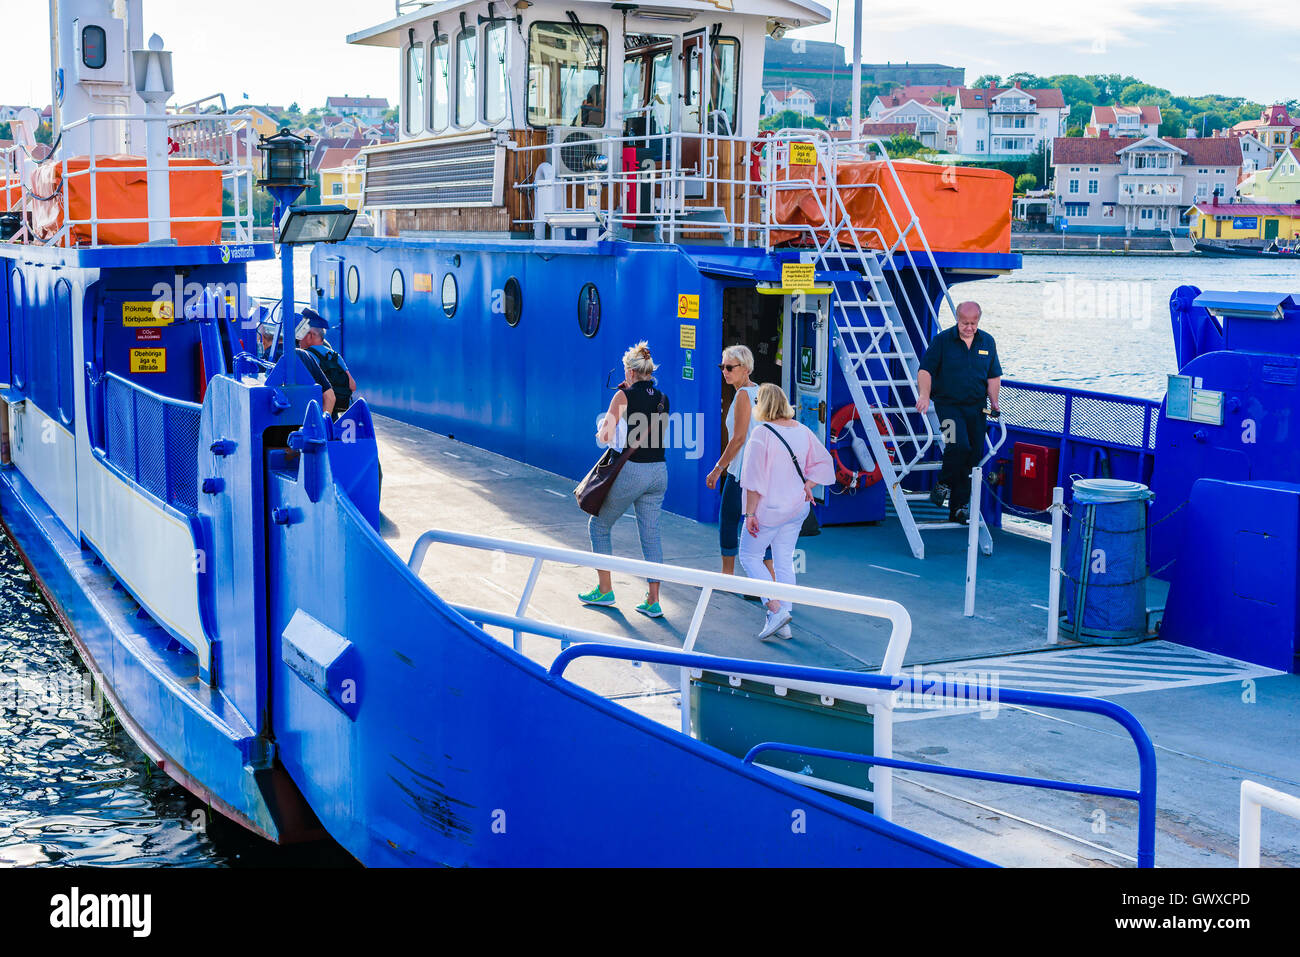 Marstrand, Sweden - September 8, 2016: Environmental documentary of people walking on the wire operated ferry to the Marstrand i Stock Photo